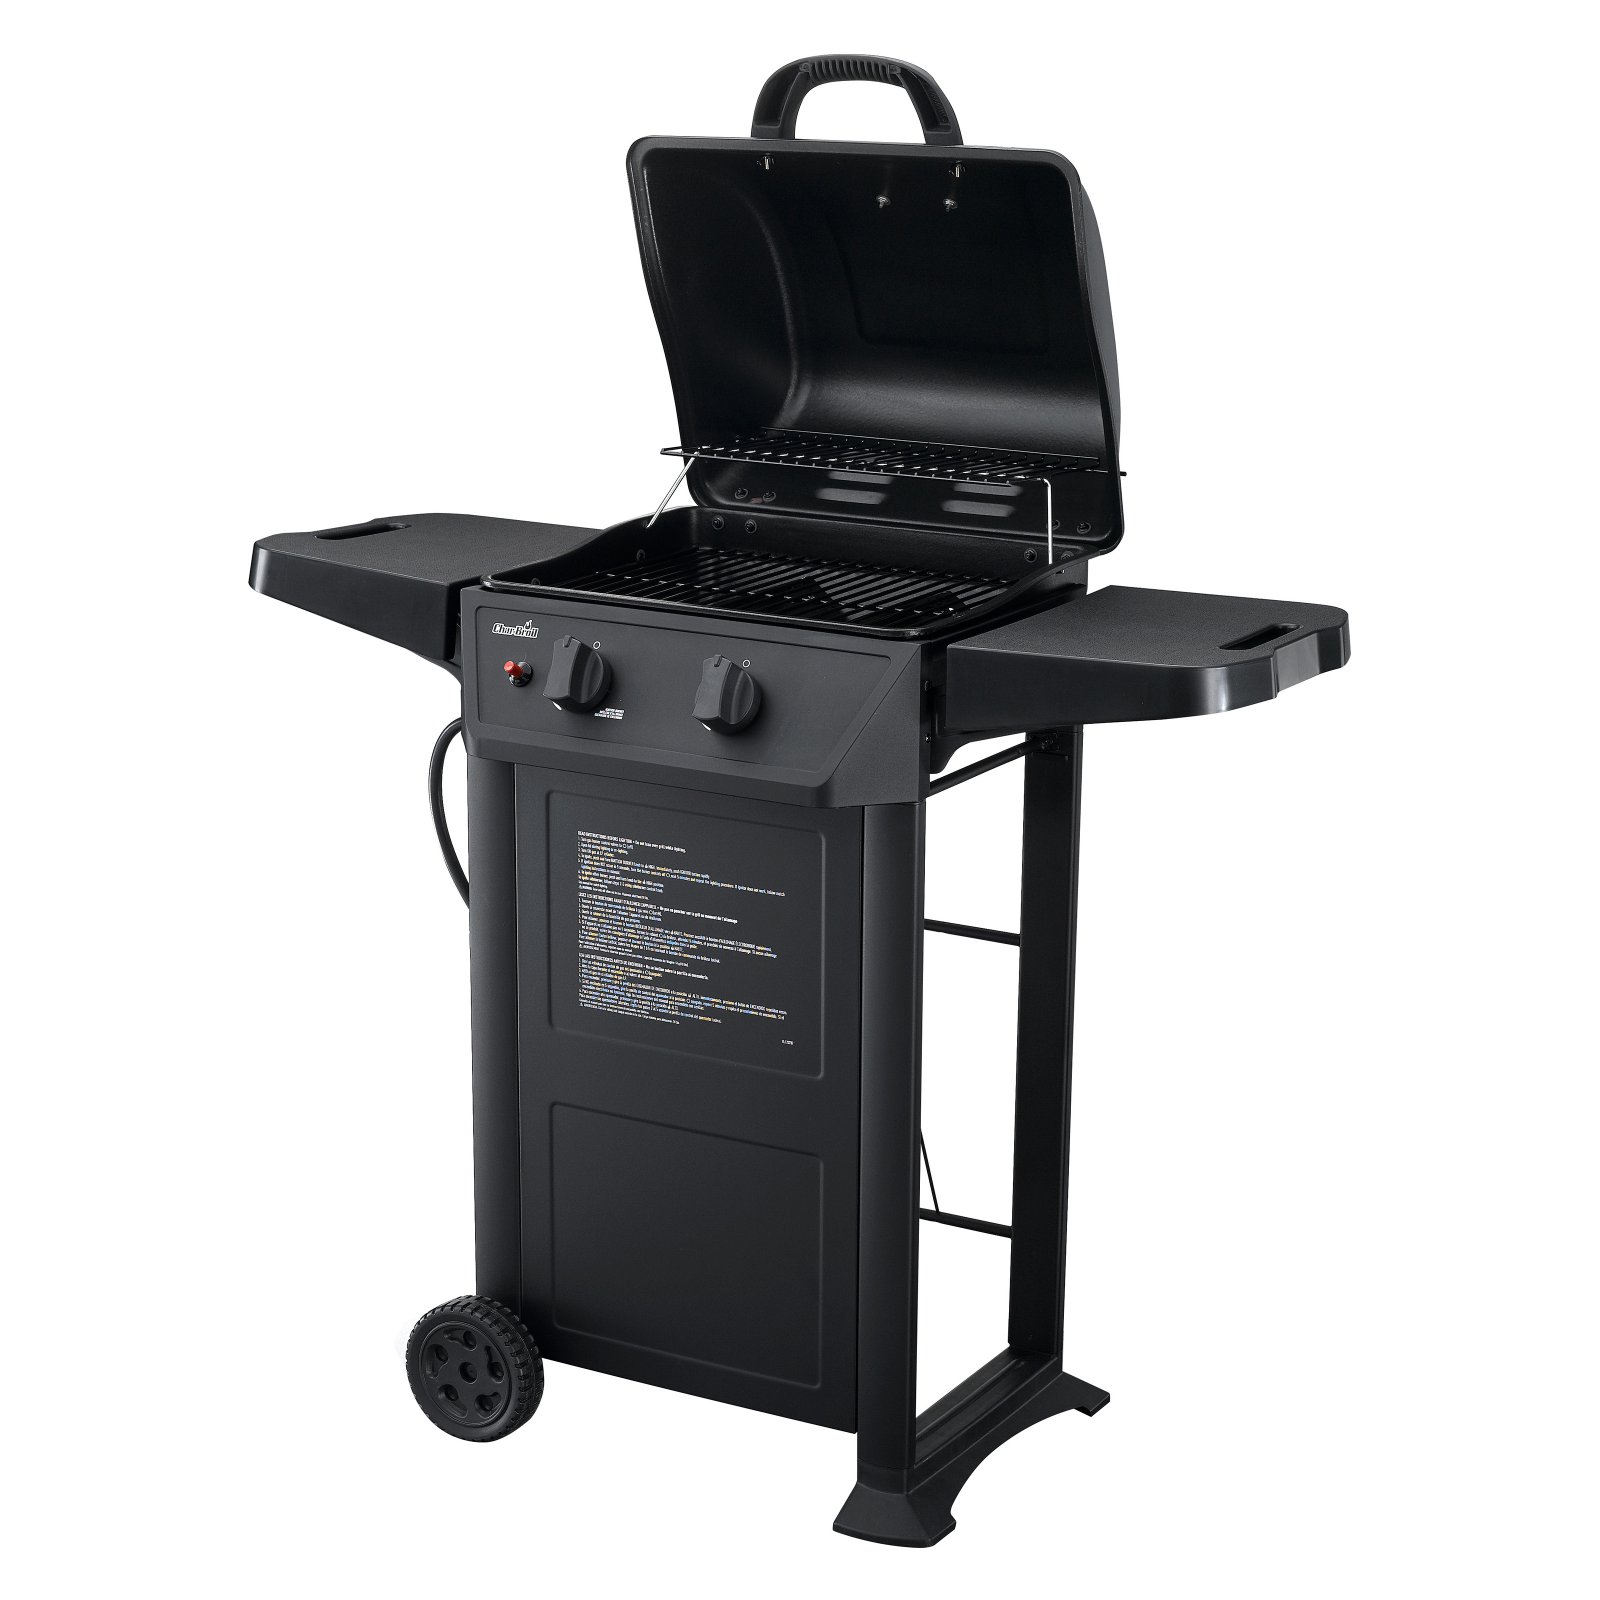 Char-Broil 300-Square Inch Gas Grill - image 4 of 9